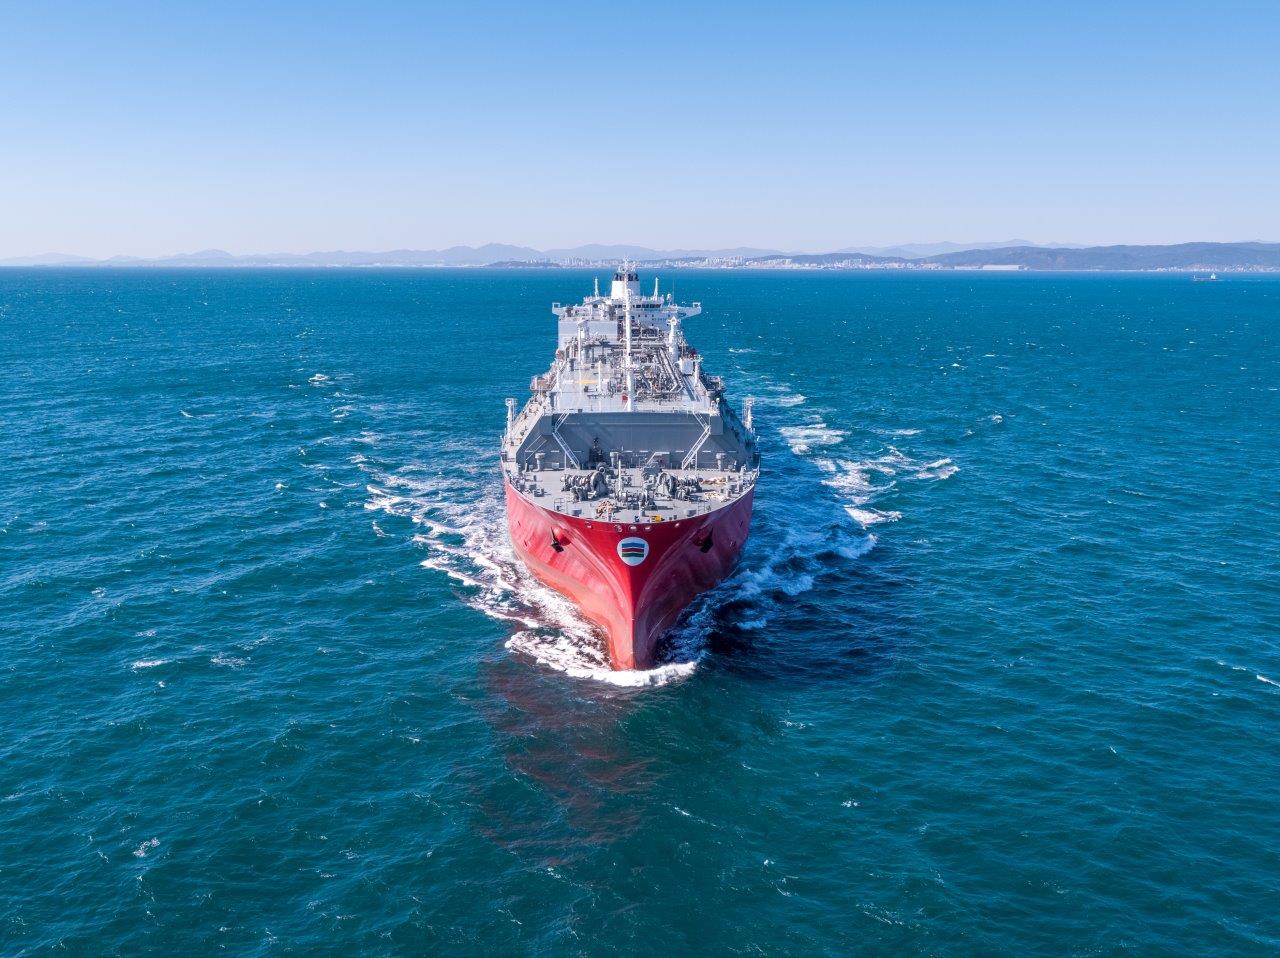 The third newly built LNG Carrier was received by Capital Gas Ship Management